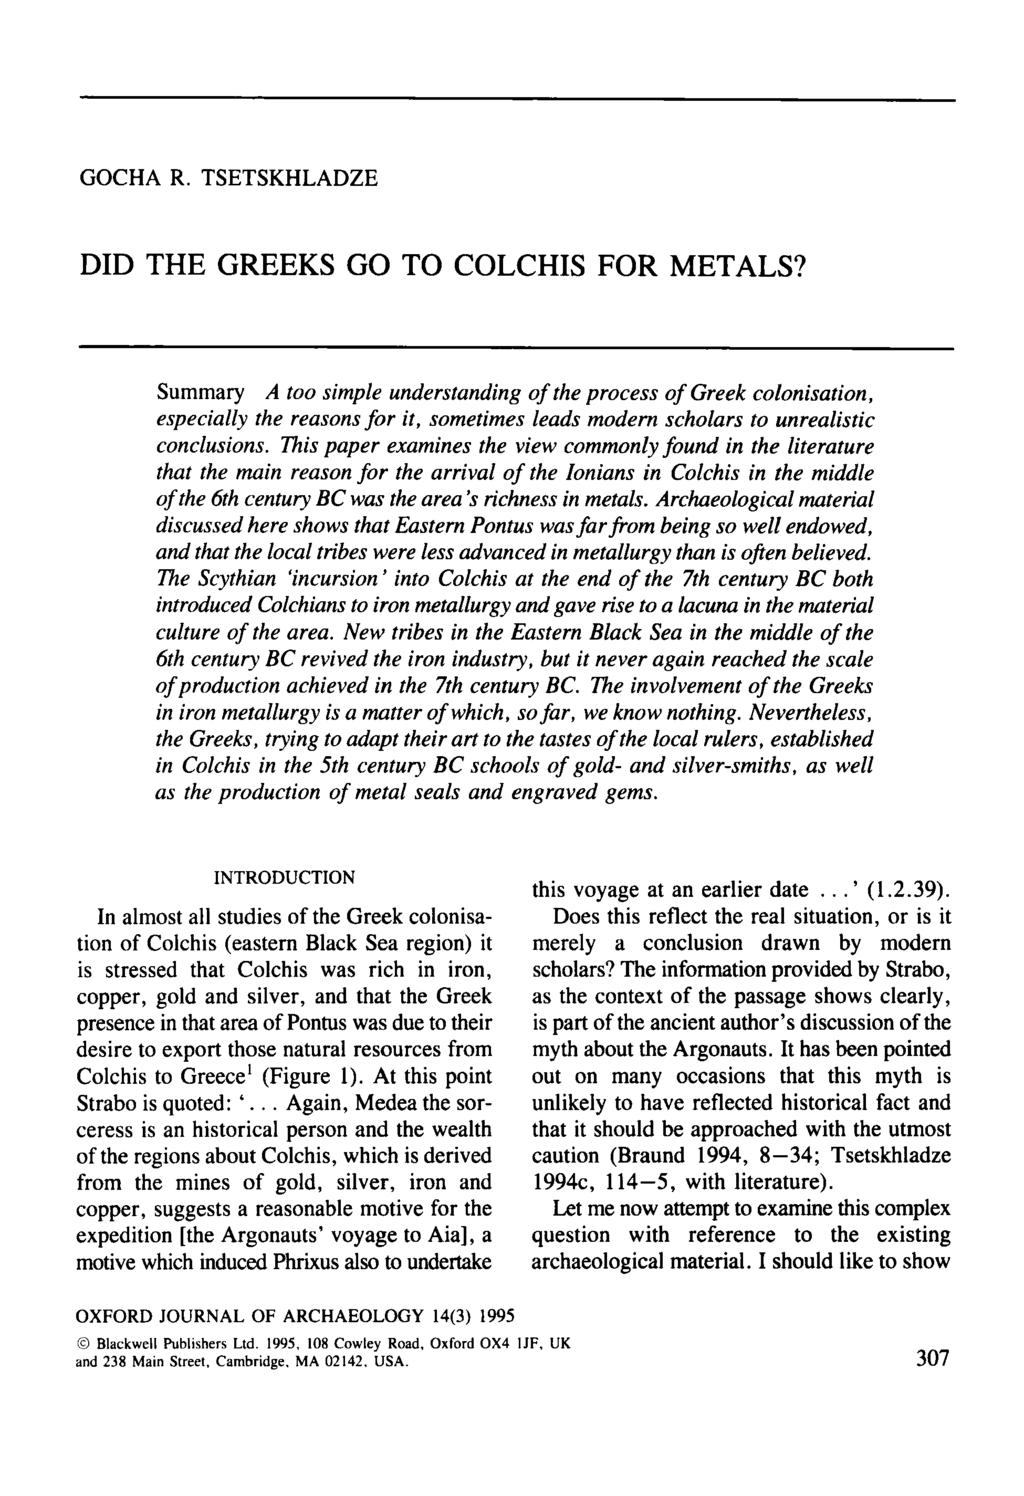 DID THE GREEKS GO TO COLCHIS FOR METALS?